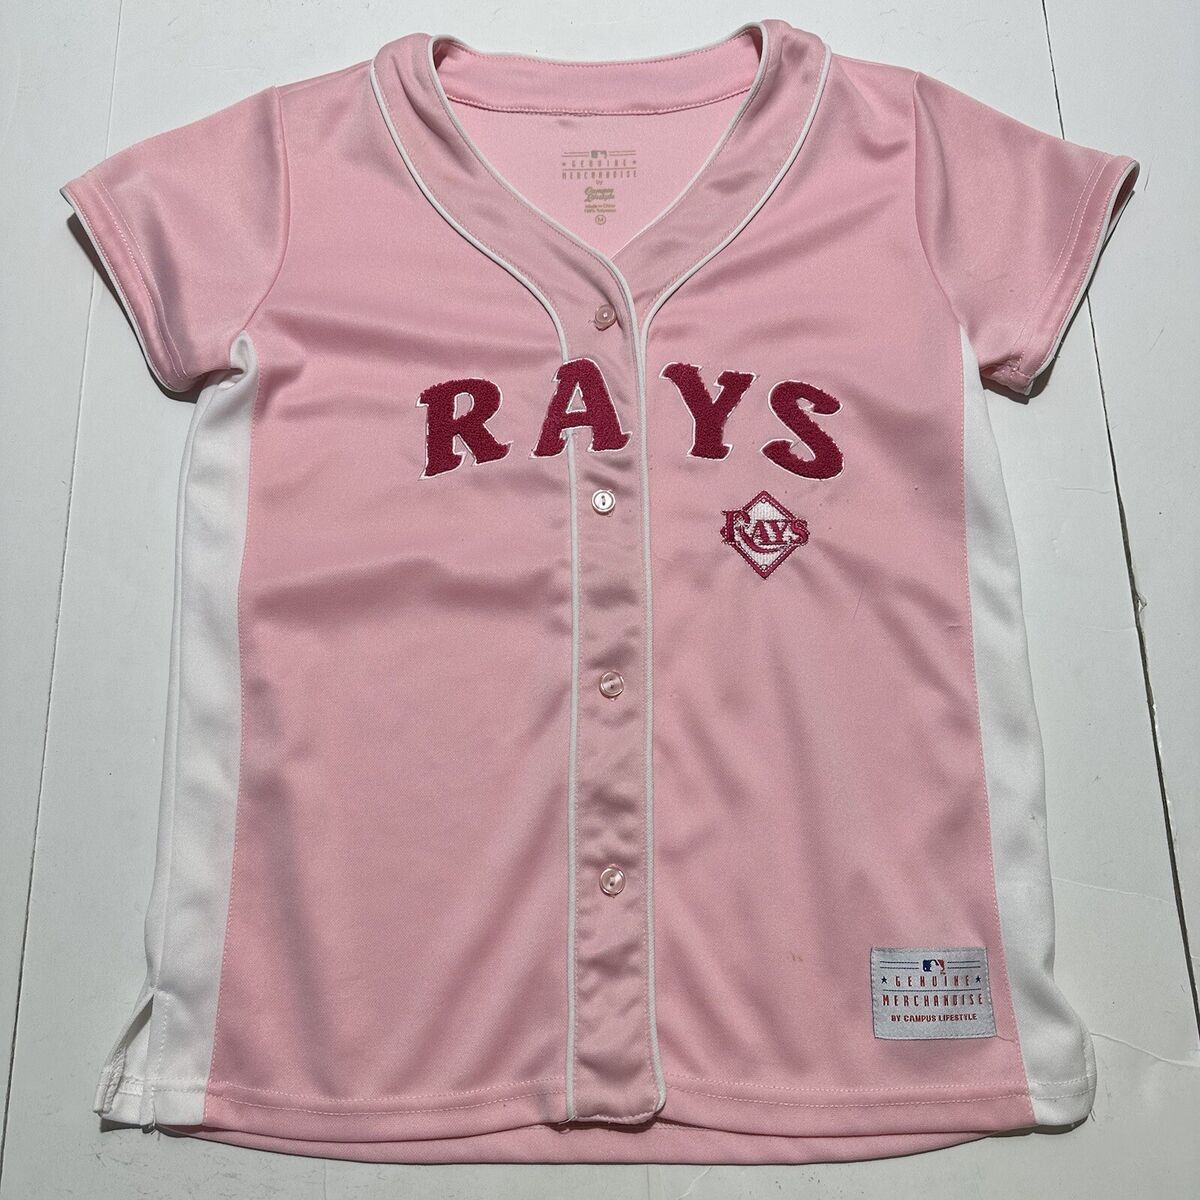 Tampa Bay Rays Jersey Womens M Pink Button Up Campus Lifestyle MLB Baseball